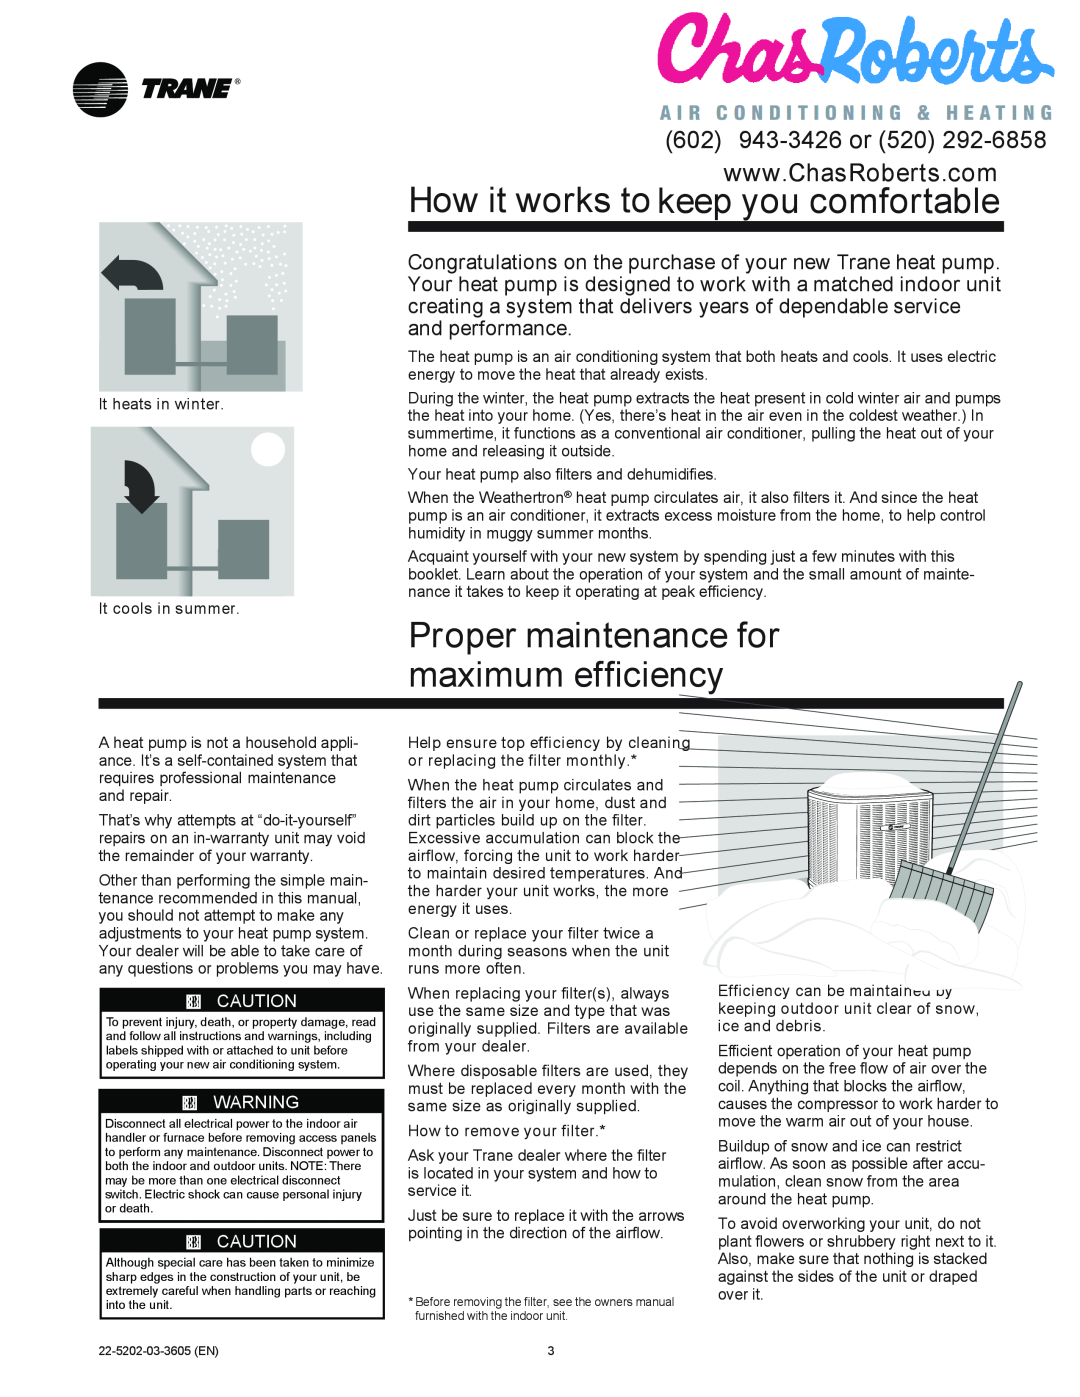 Trane 22-5202-03-3605 manual How it works to keep you comfortable, Proper maintenance for maximum efficiency, 00! CAUTION 